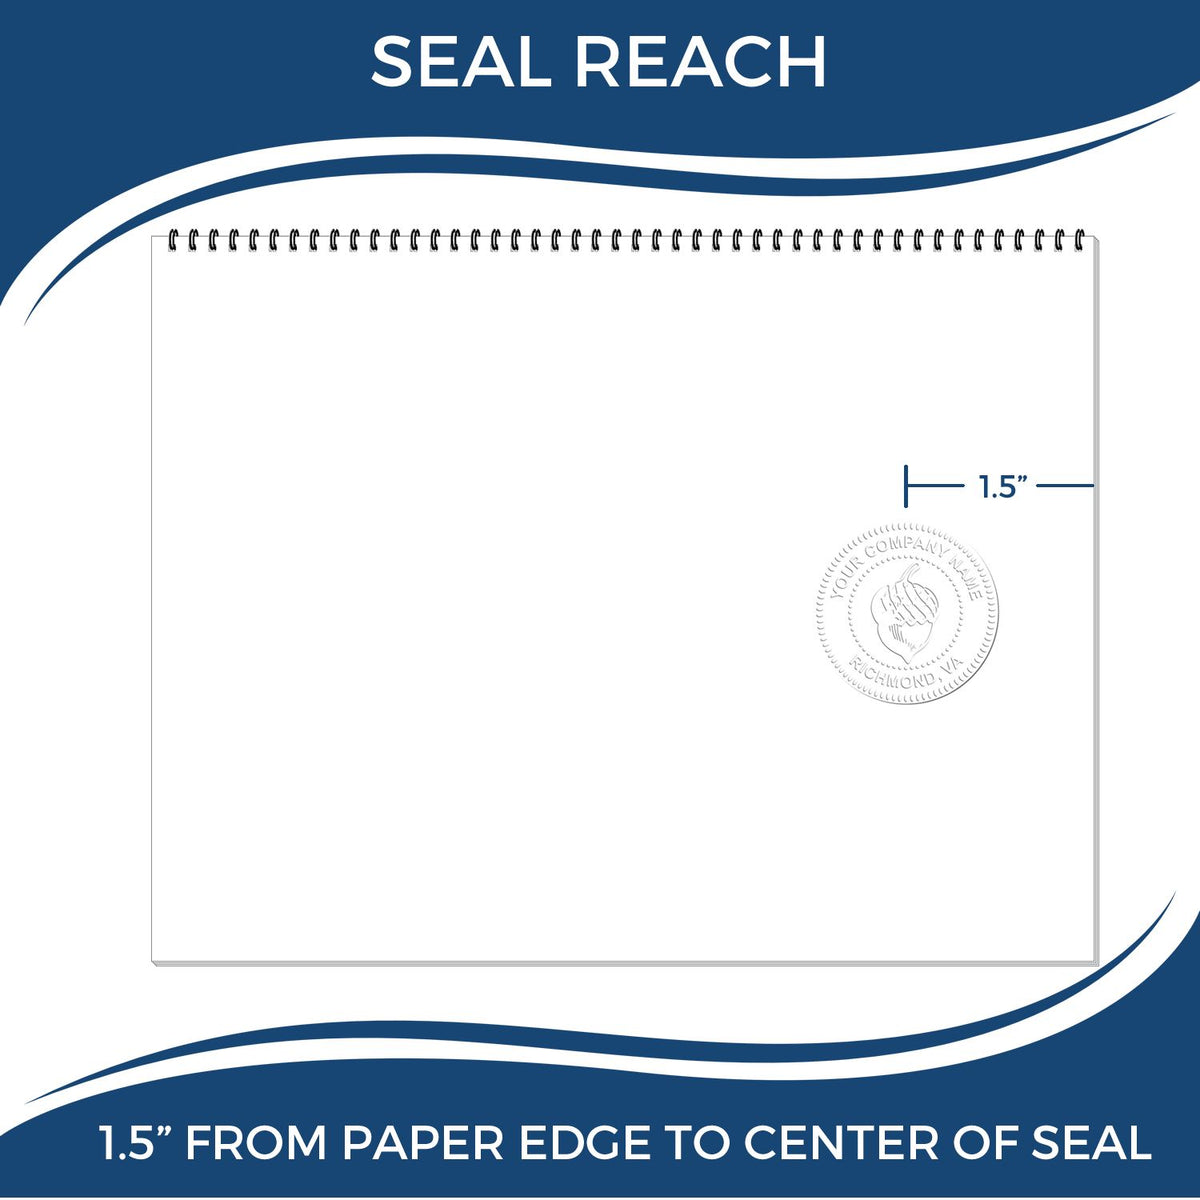 An infographic showing the seal reach which is represented by a ruler and a miniature seal image of the North Dakota Desk Architect Embossing Seal